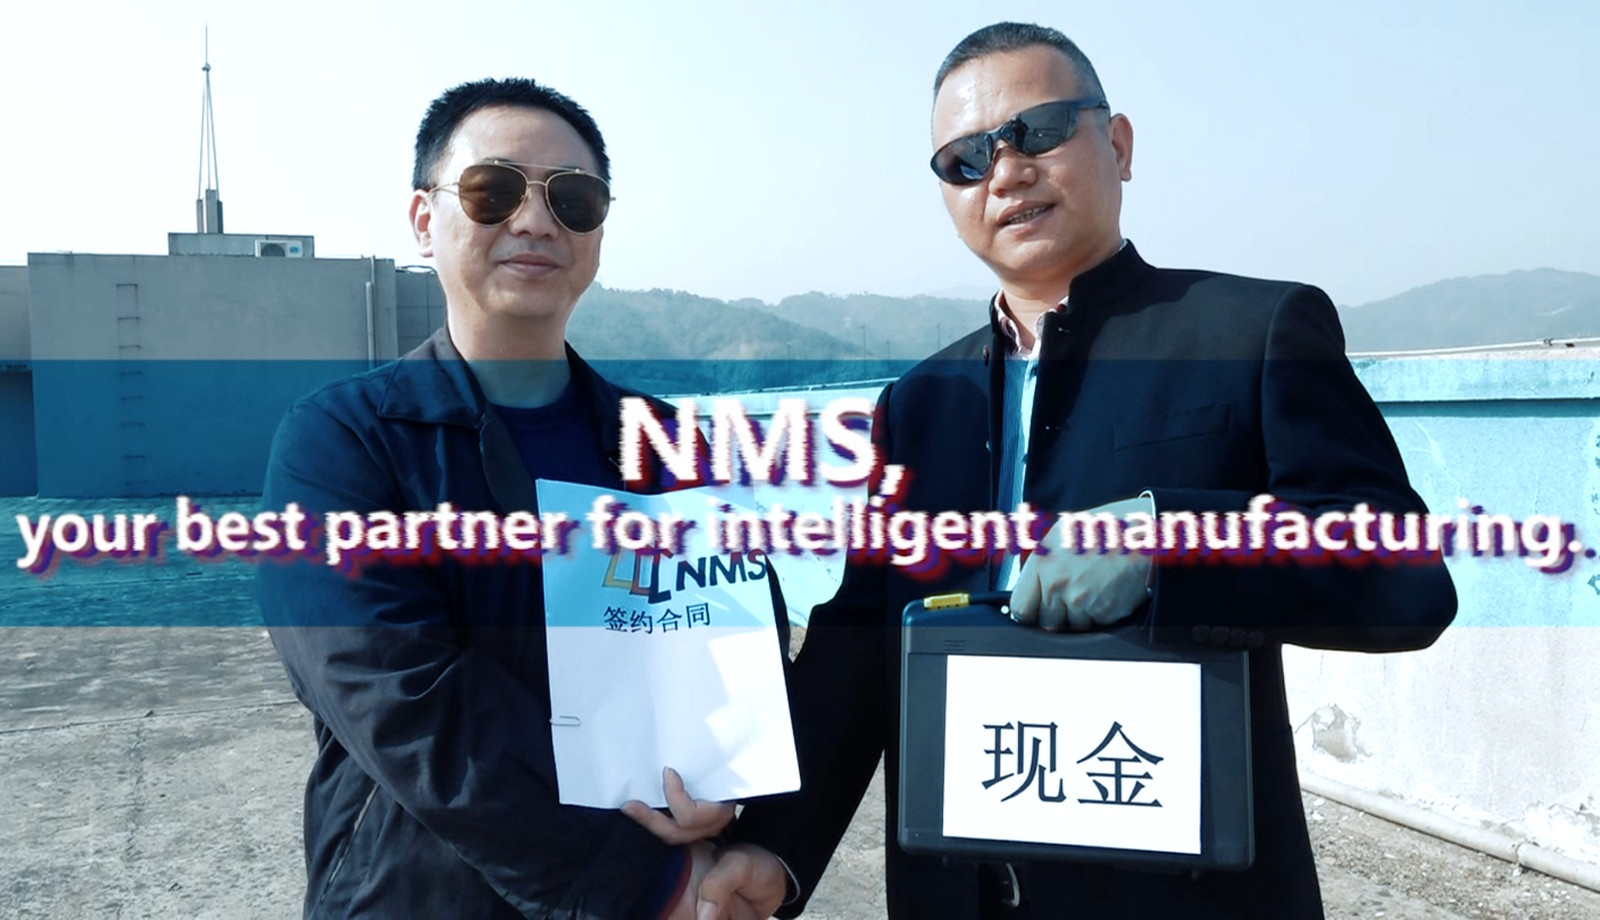 NMS, Your Best Partner for Intelligent Manufacturing